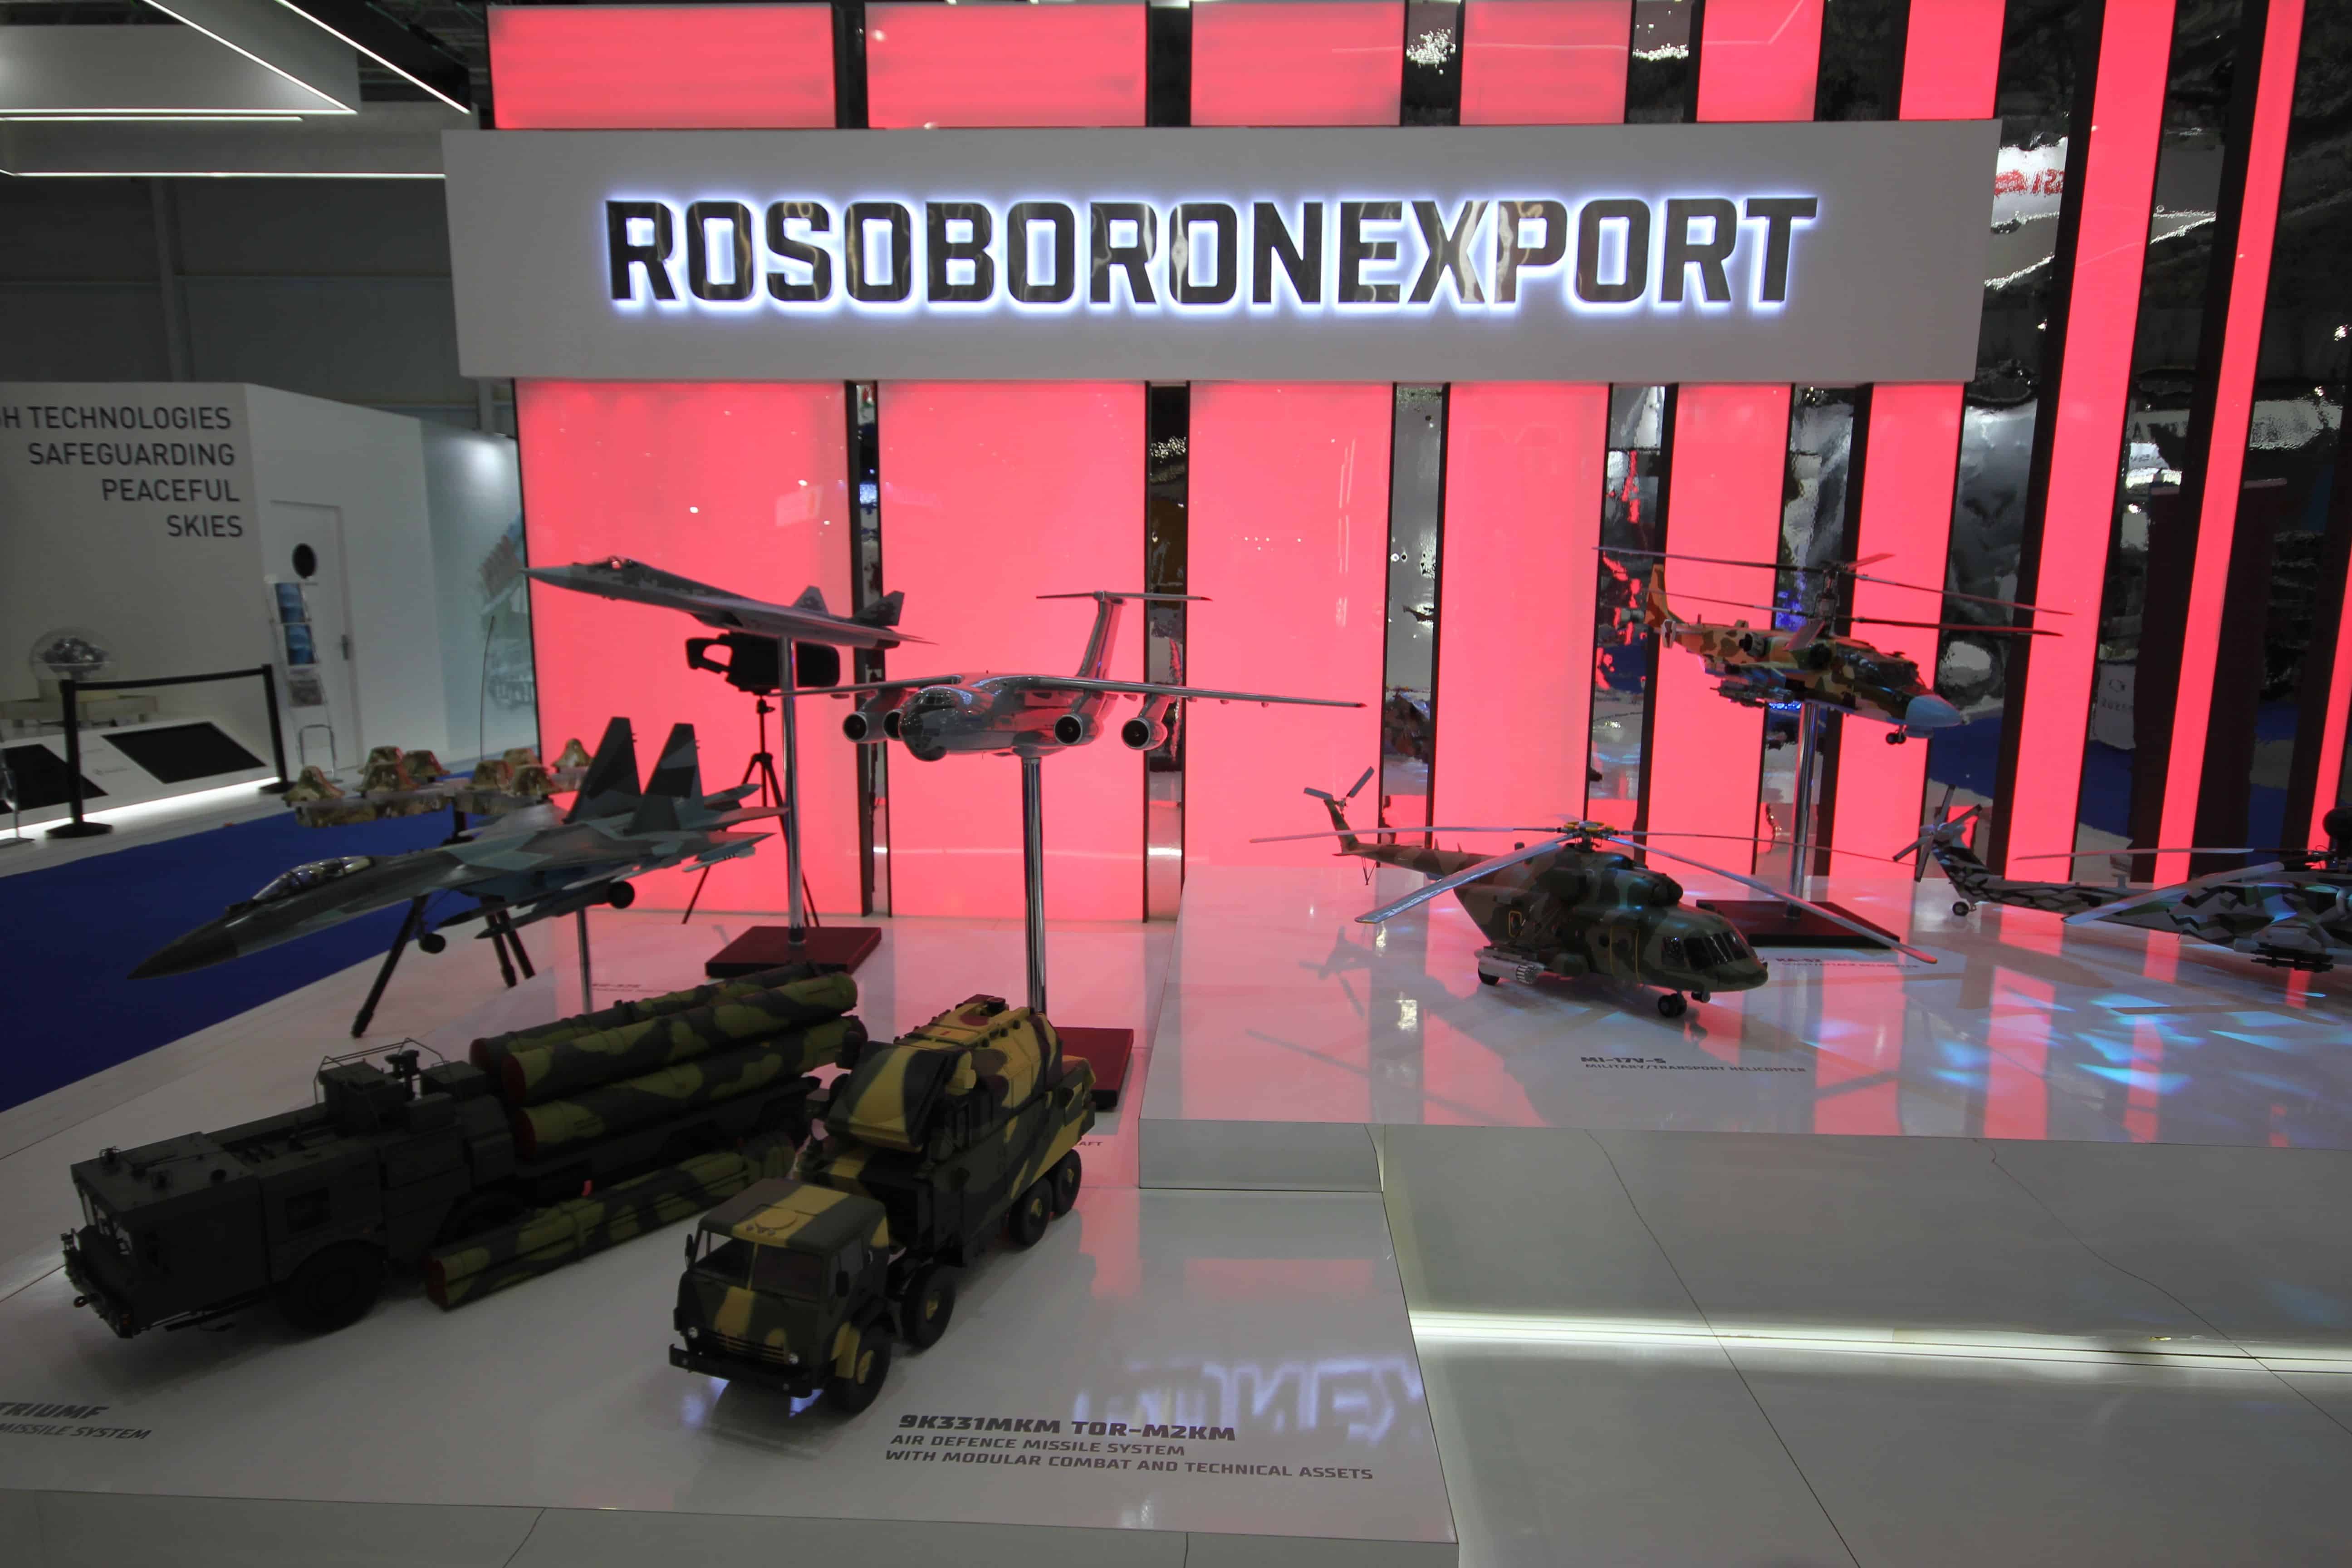 Dubai, UAE - November 14, 2021: Rosoboronexport exhibitor pavilion at Dubai Airshow 2021 showcasing the Russia state-owned company's latest military products and technologies.